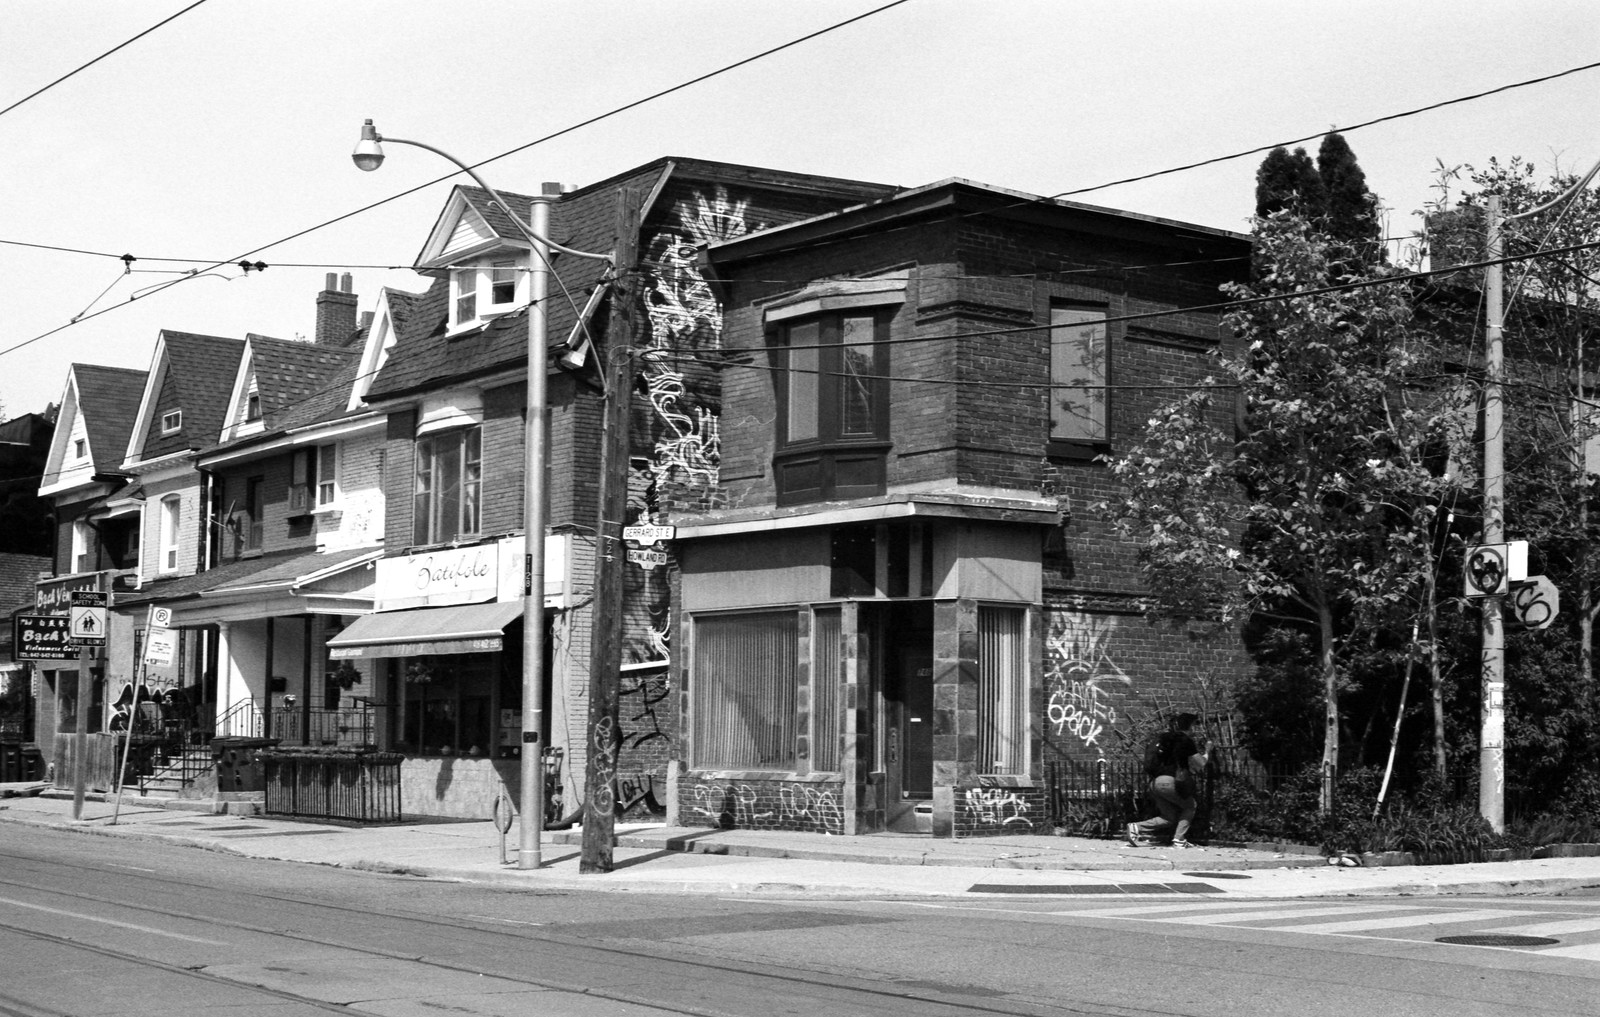 North Side of Gerrard in Chinatown East